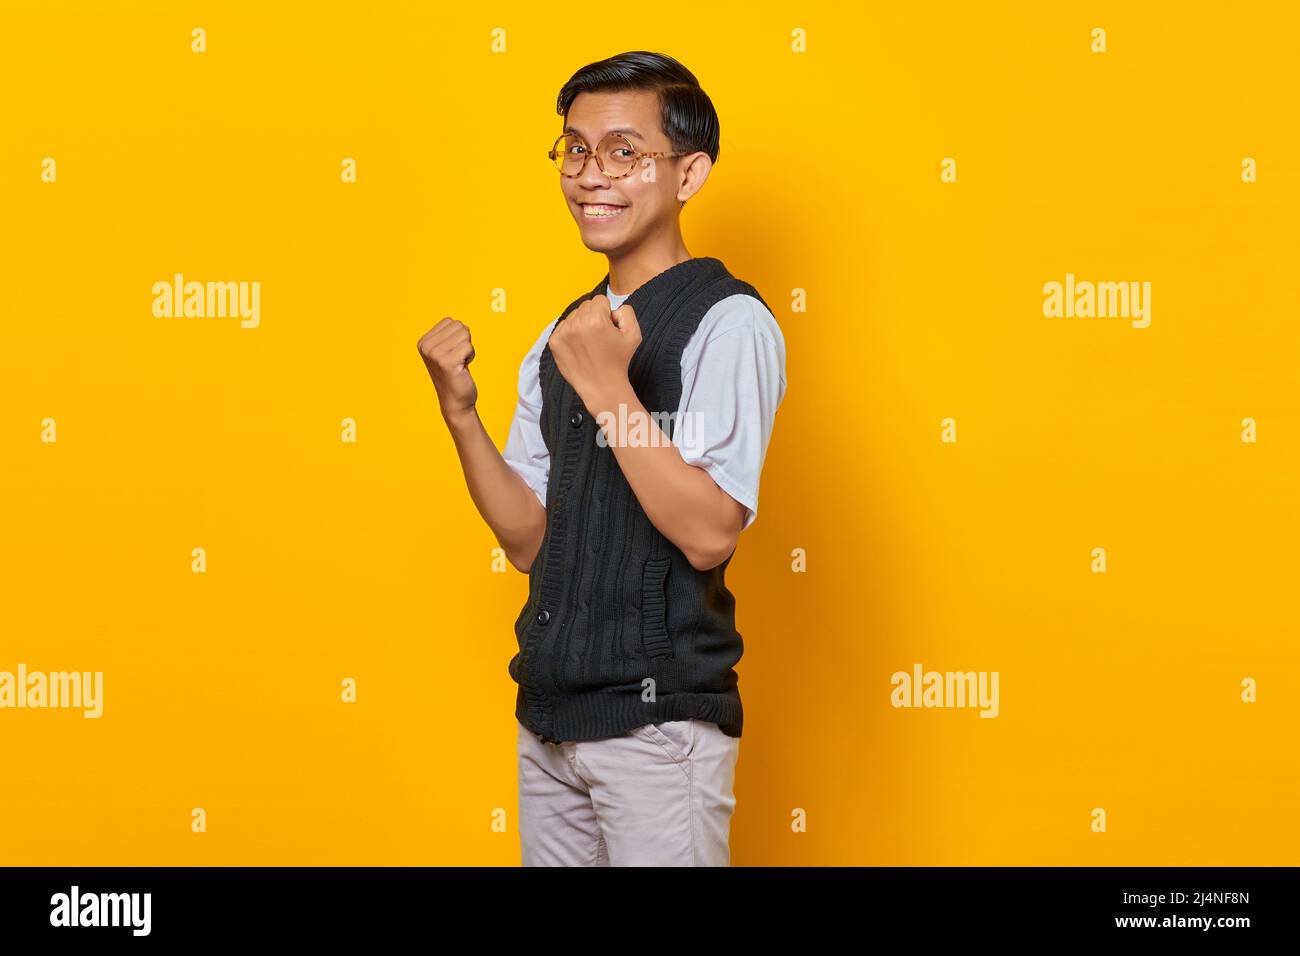 Portrait of excited young Asian man celebrating success with raised arms on yellow background Stock Photo